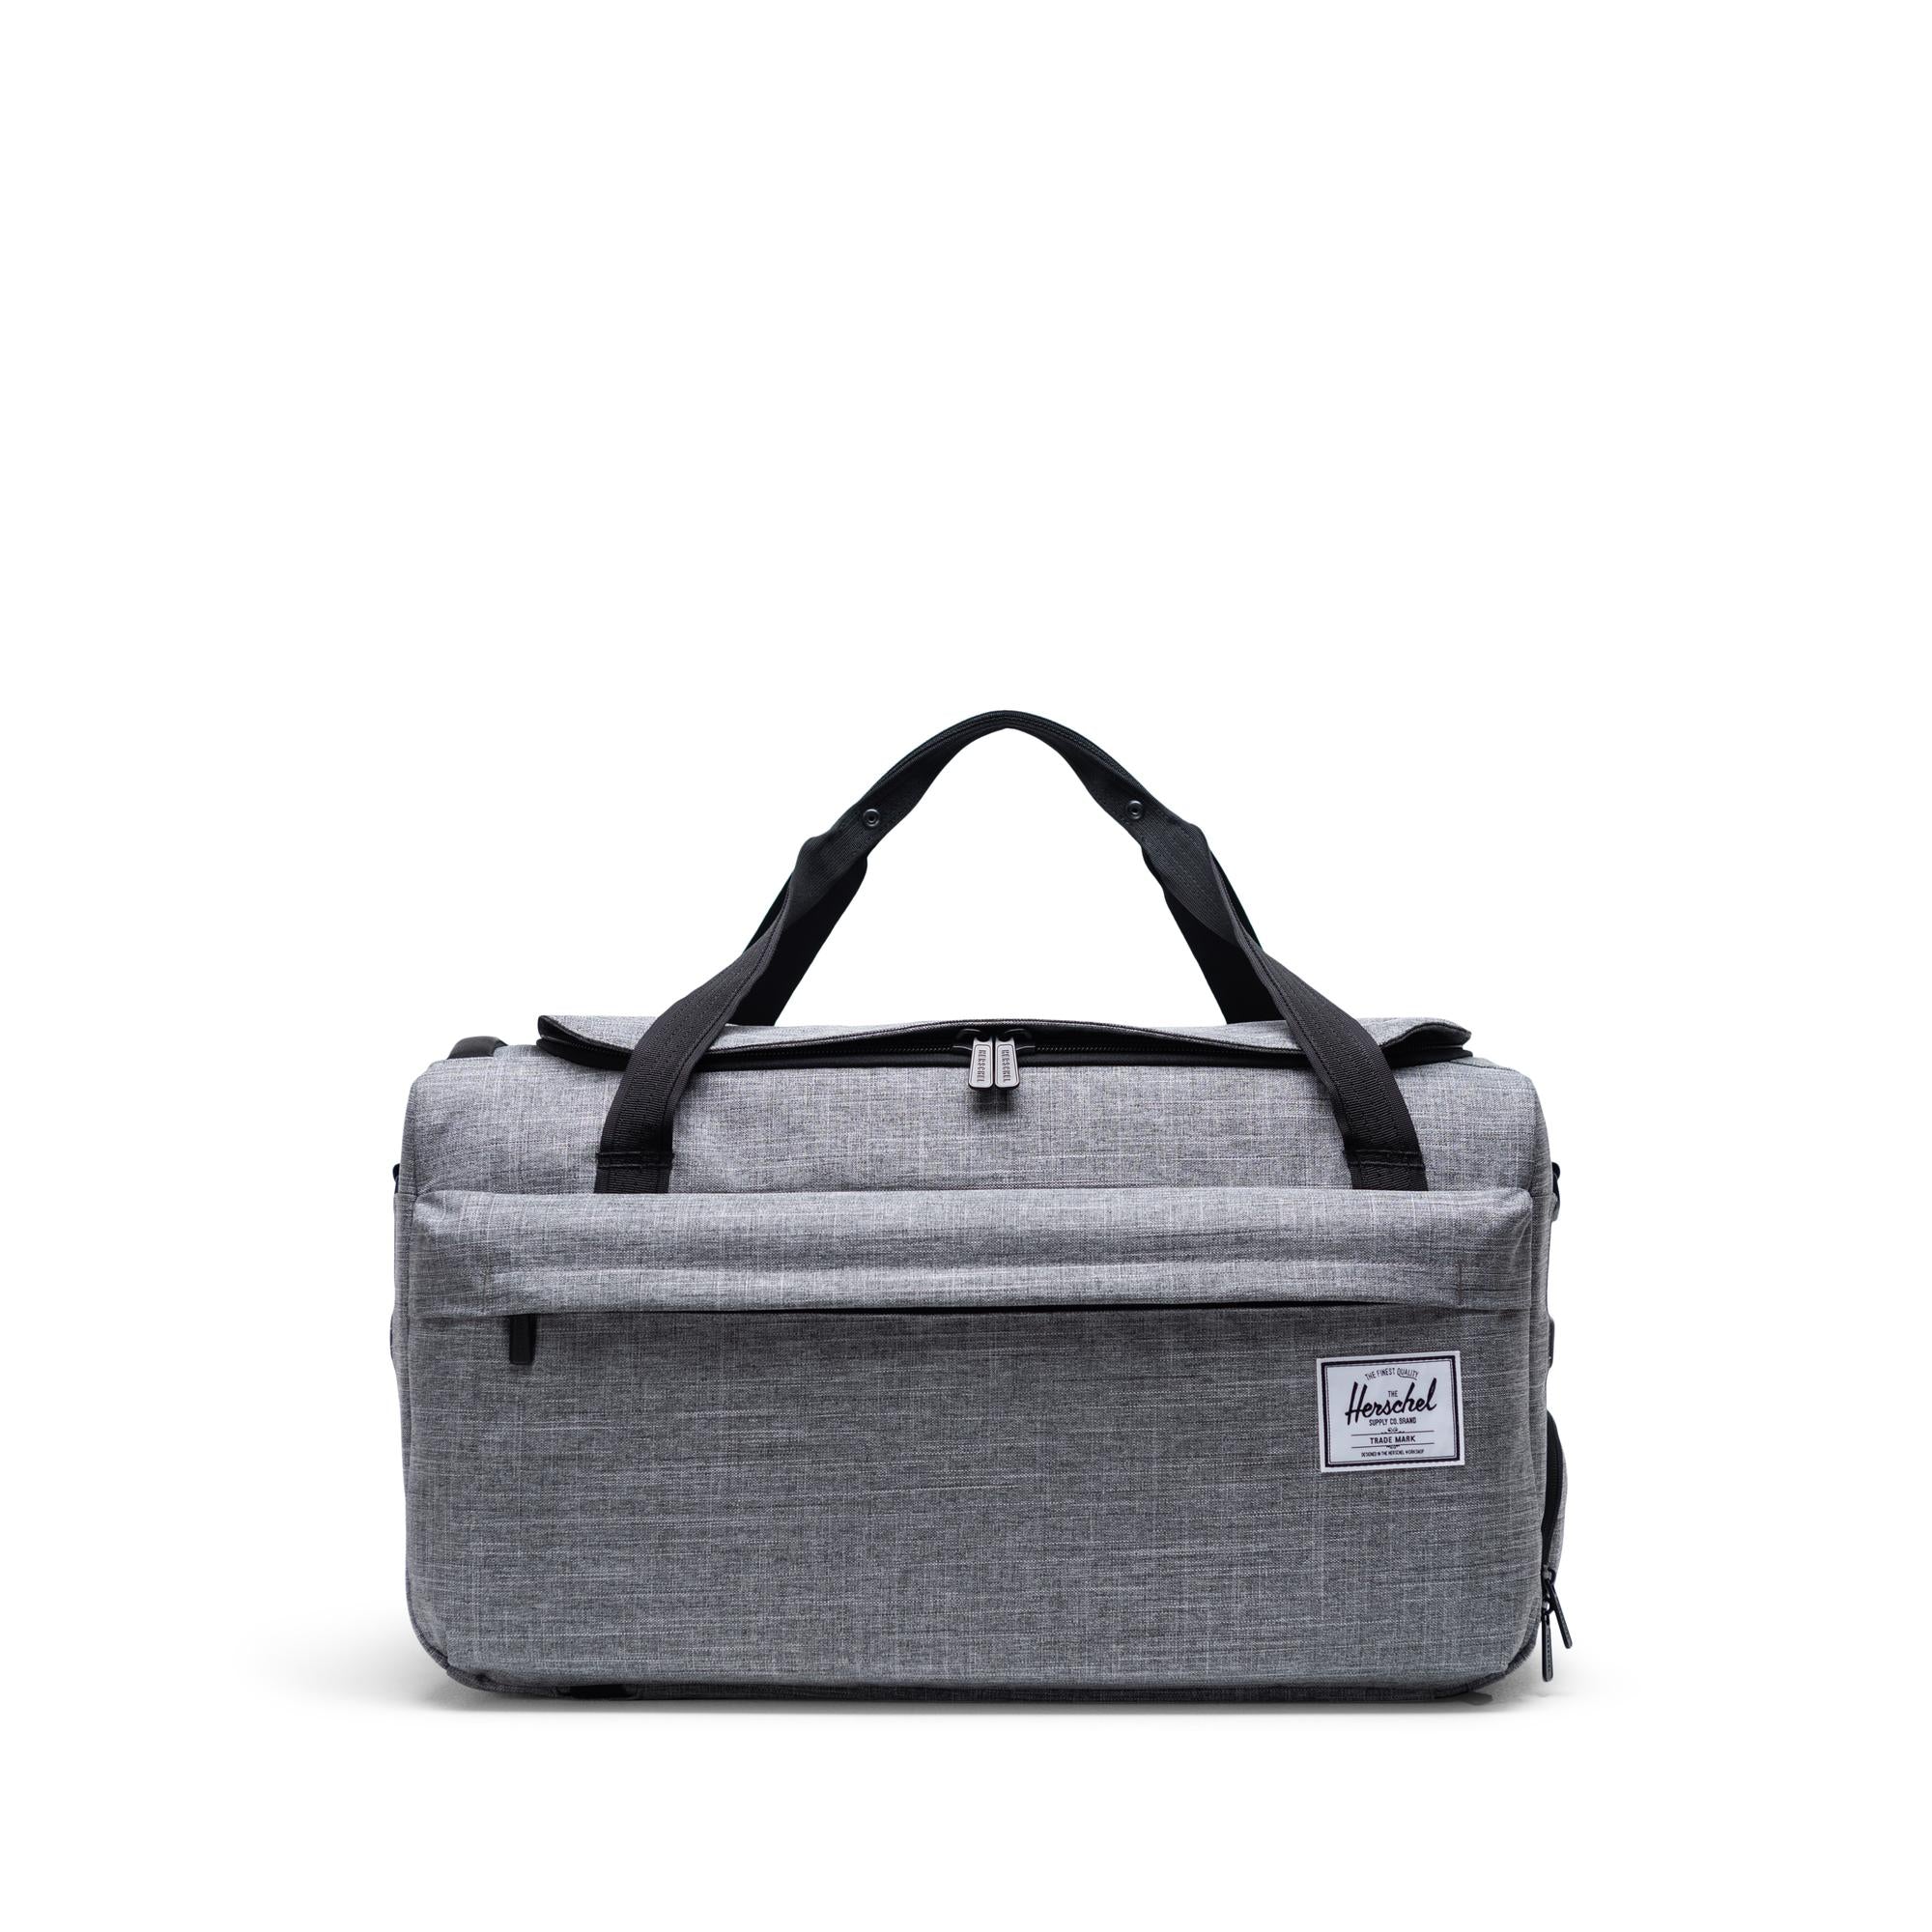 Outfitter Luggage 50L